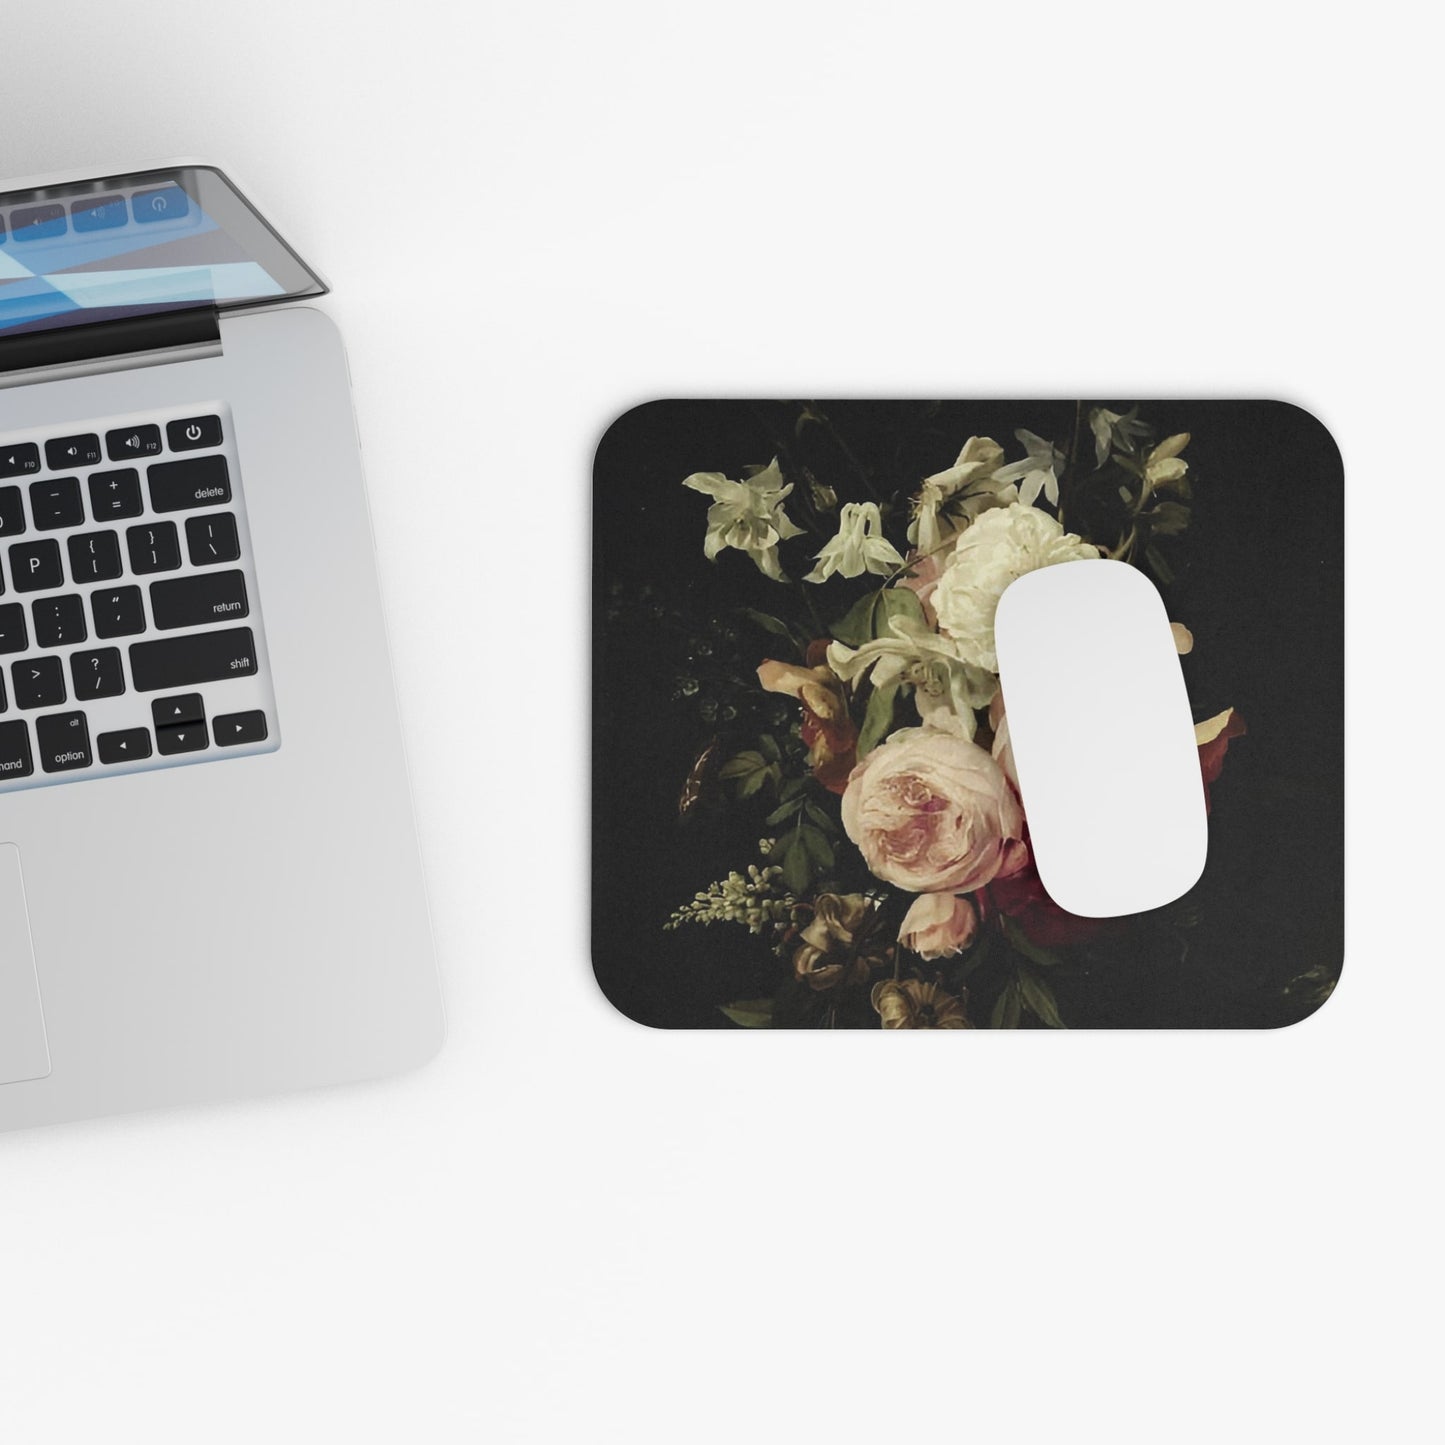 Vintage Peony Design Laptop Mouse Pad with White Mouse